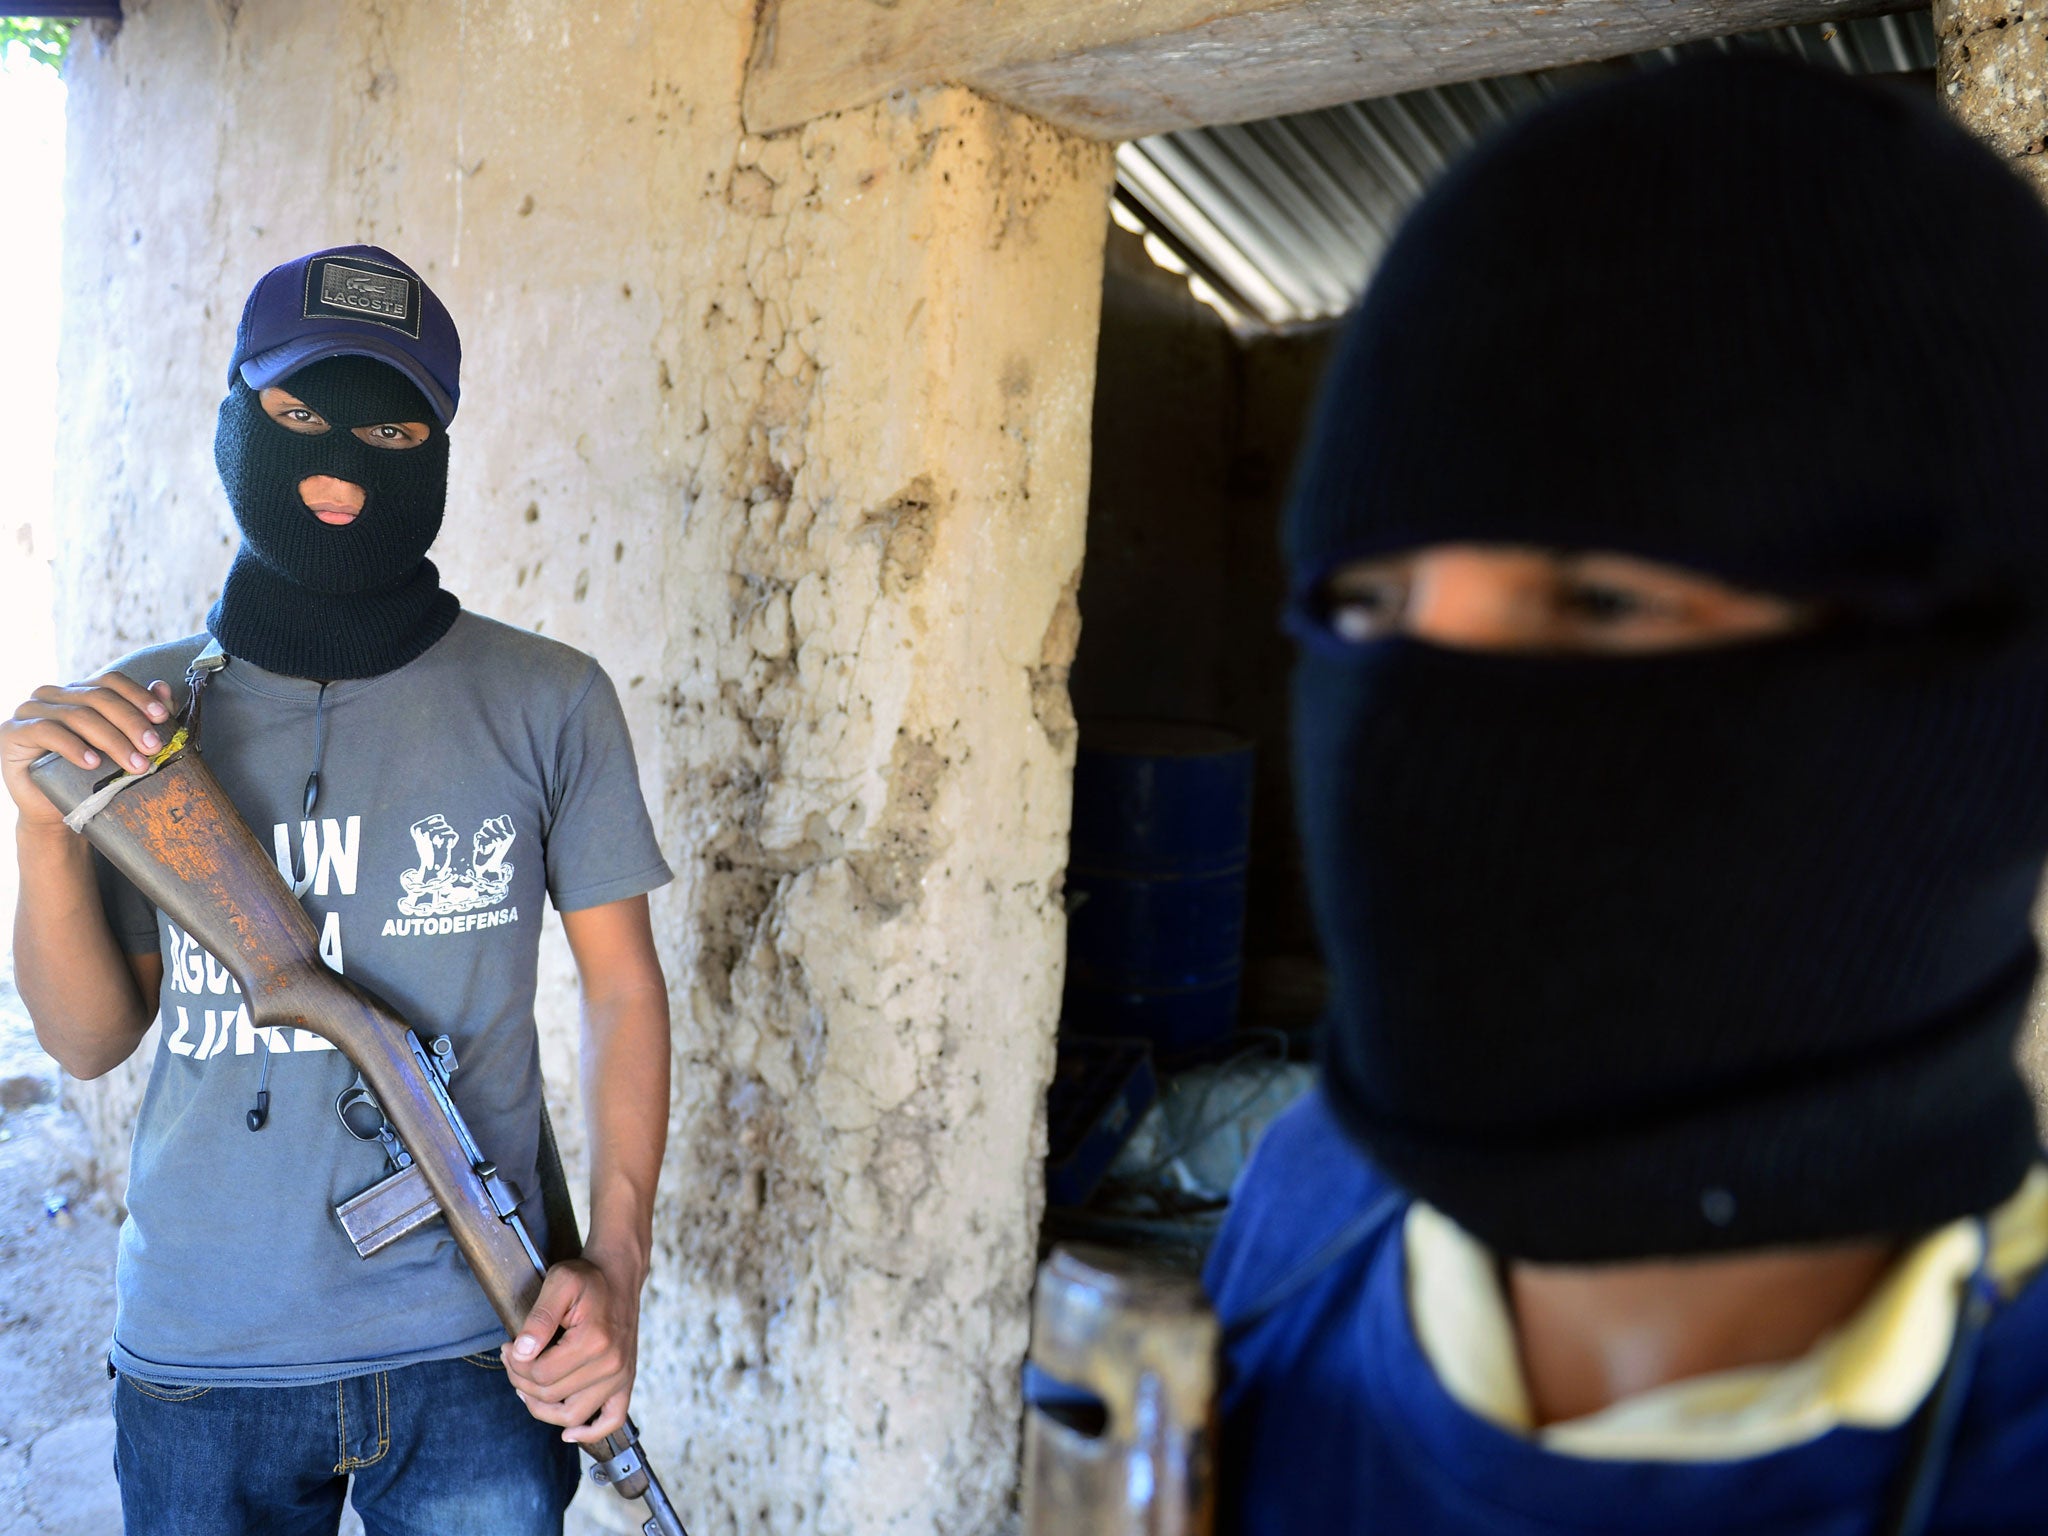 Two former informants of the Templar Knights drug cartel pose in Michoacan state, Mexico